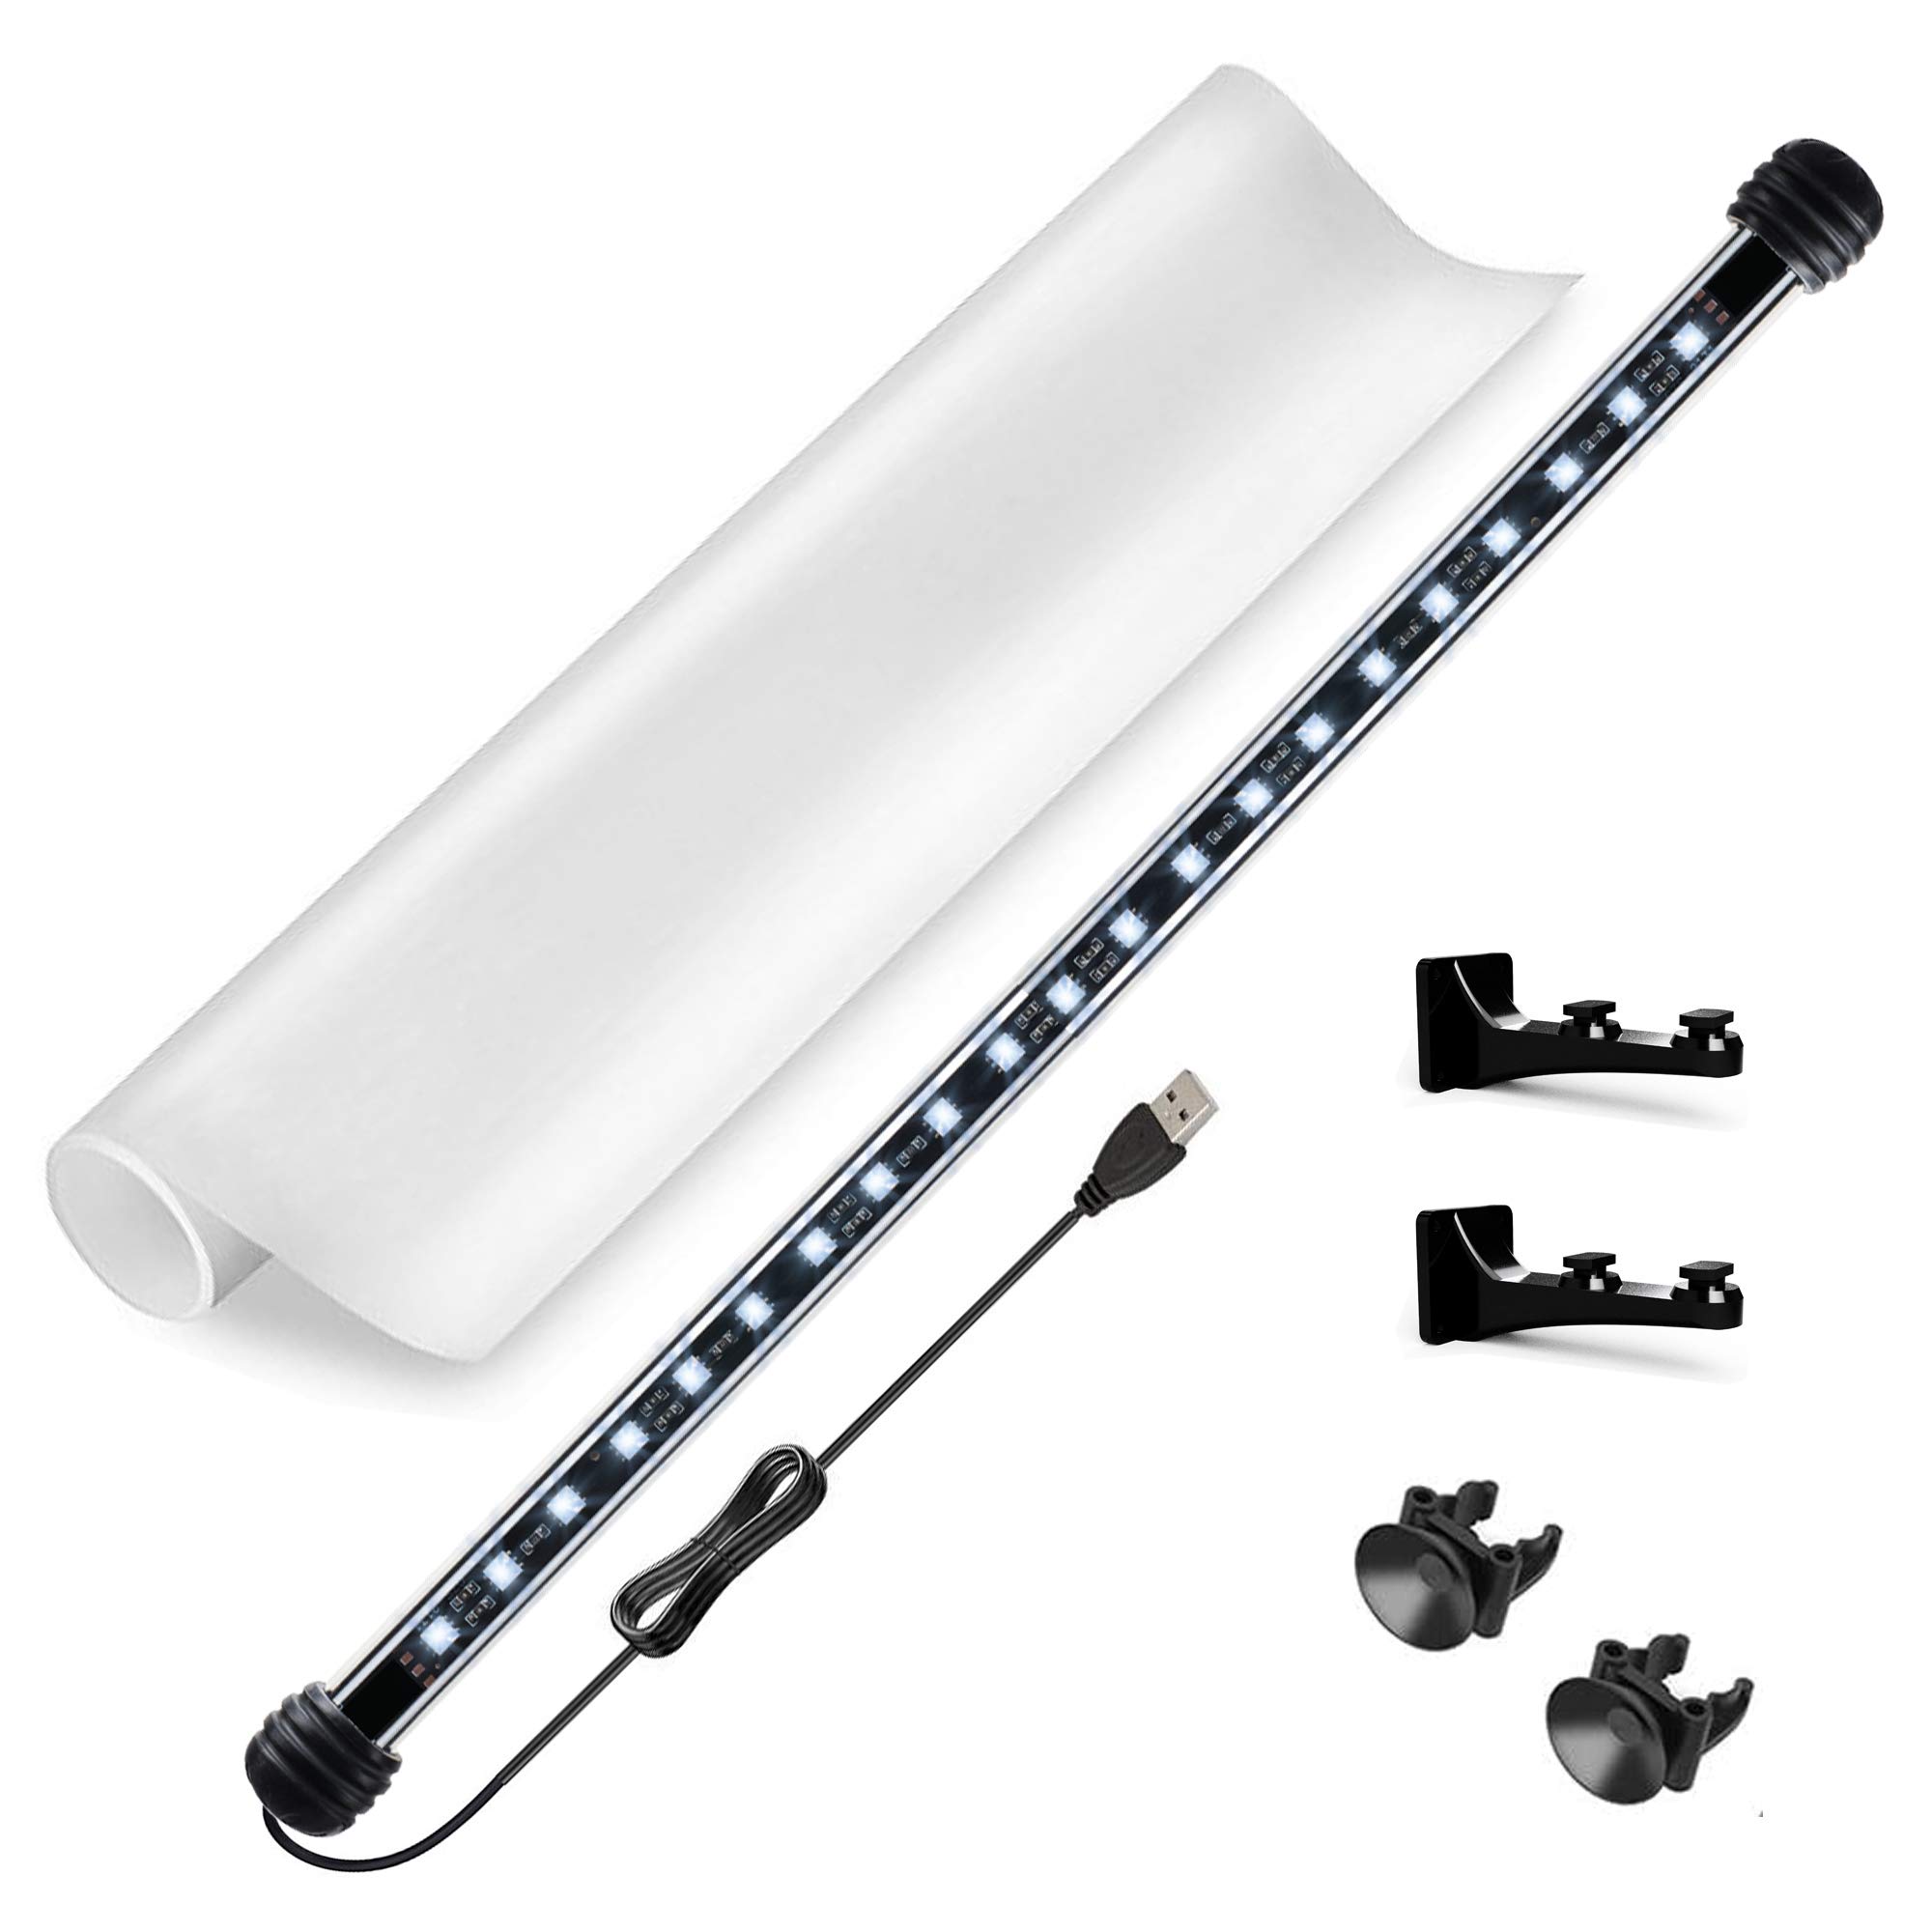 CURRENT USA Serene Add-on Accessory LED Background Light Kit | Includes Frosted Background Glass Film and RGB LED Light Strip | Fits Aquariums 48"-60" (Requires Serene Controller)